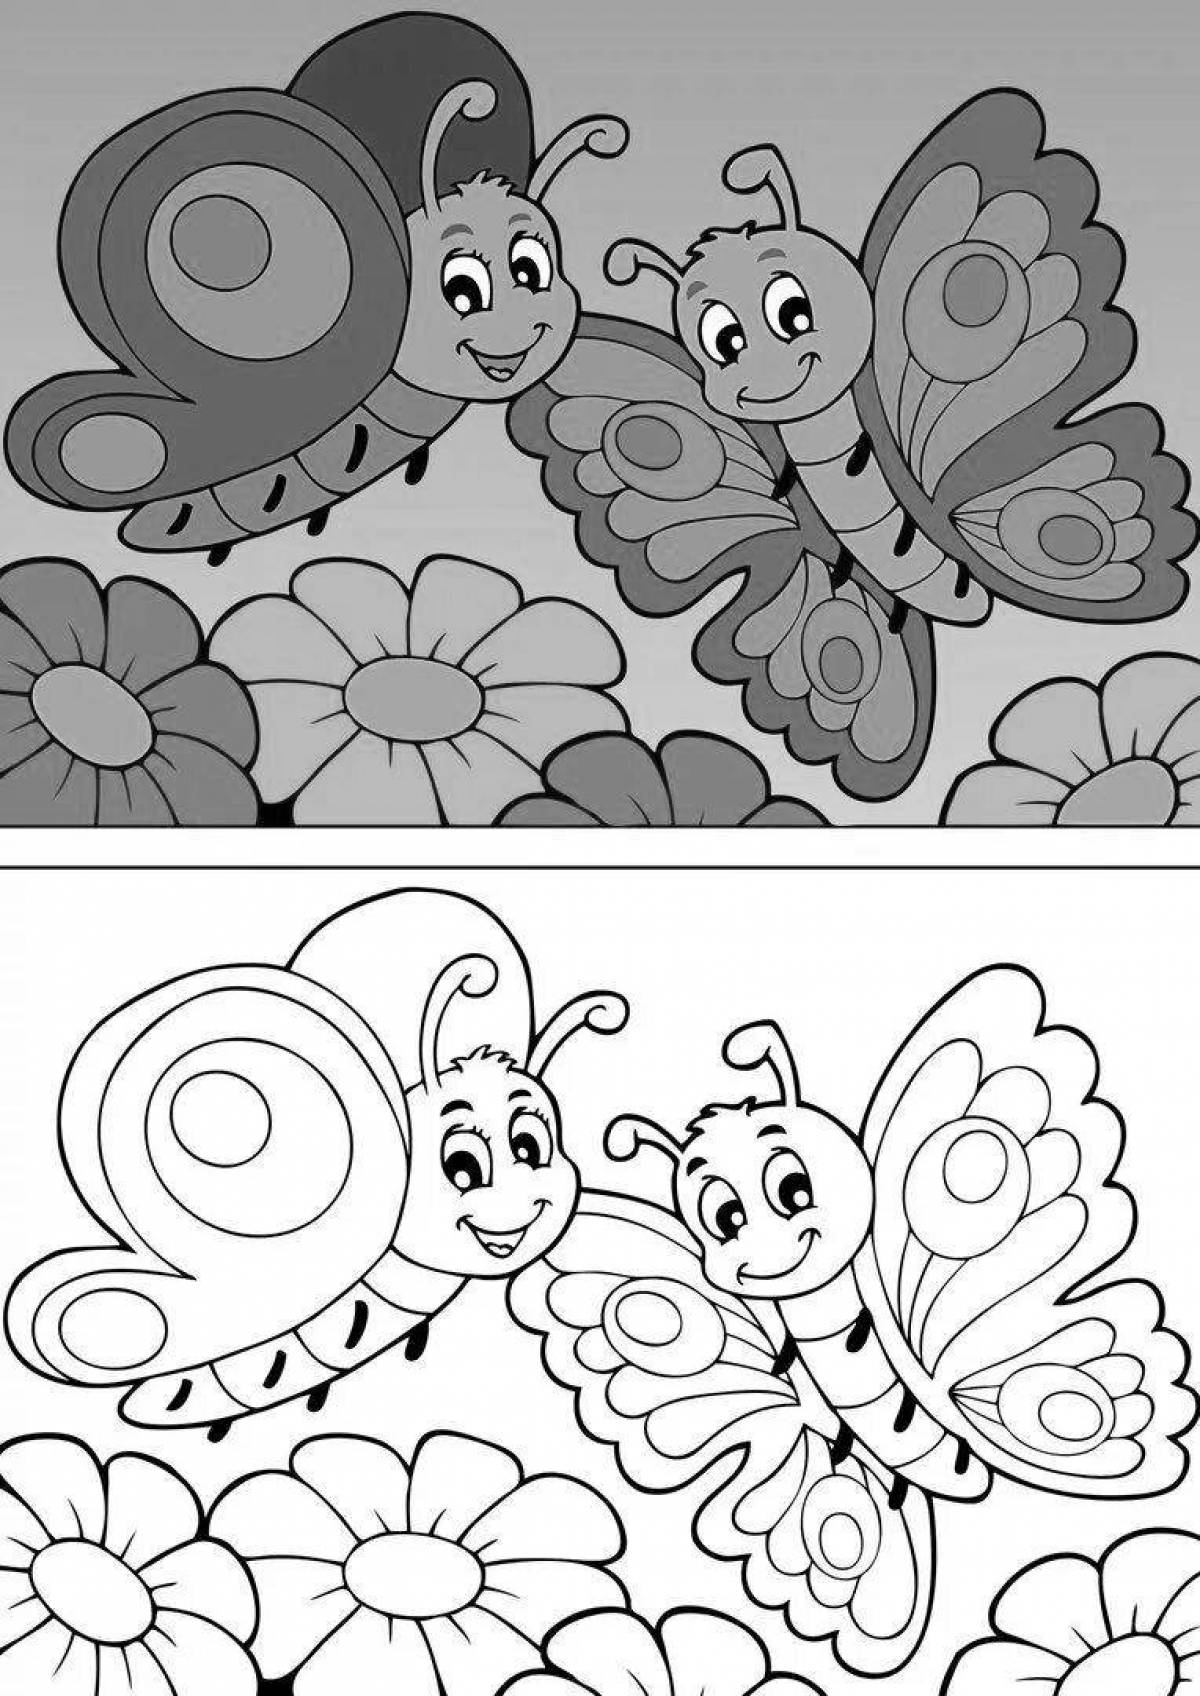 Colorfully pigmented butterfly coloring page